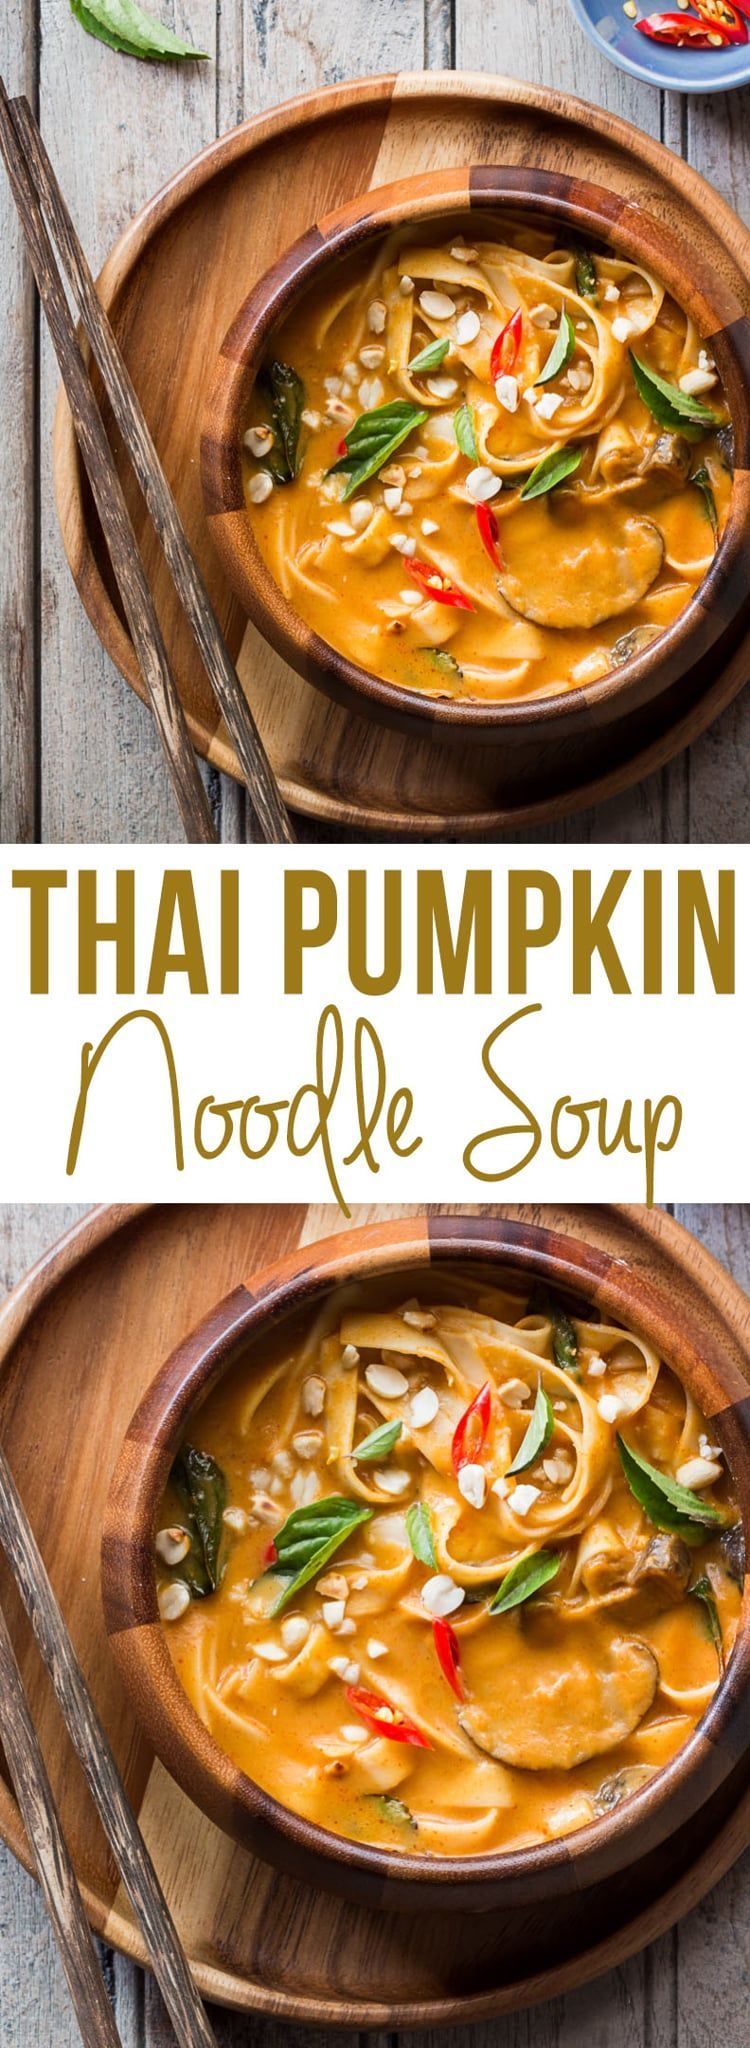 Creamy, comforting spicy thai curry pumpkin noodle soup gets ready in 20 minutes and the recipe takes you back to Thailand!